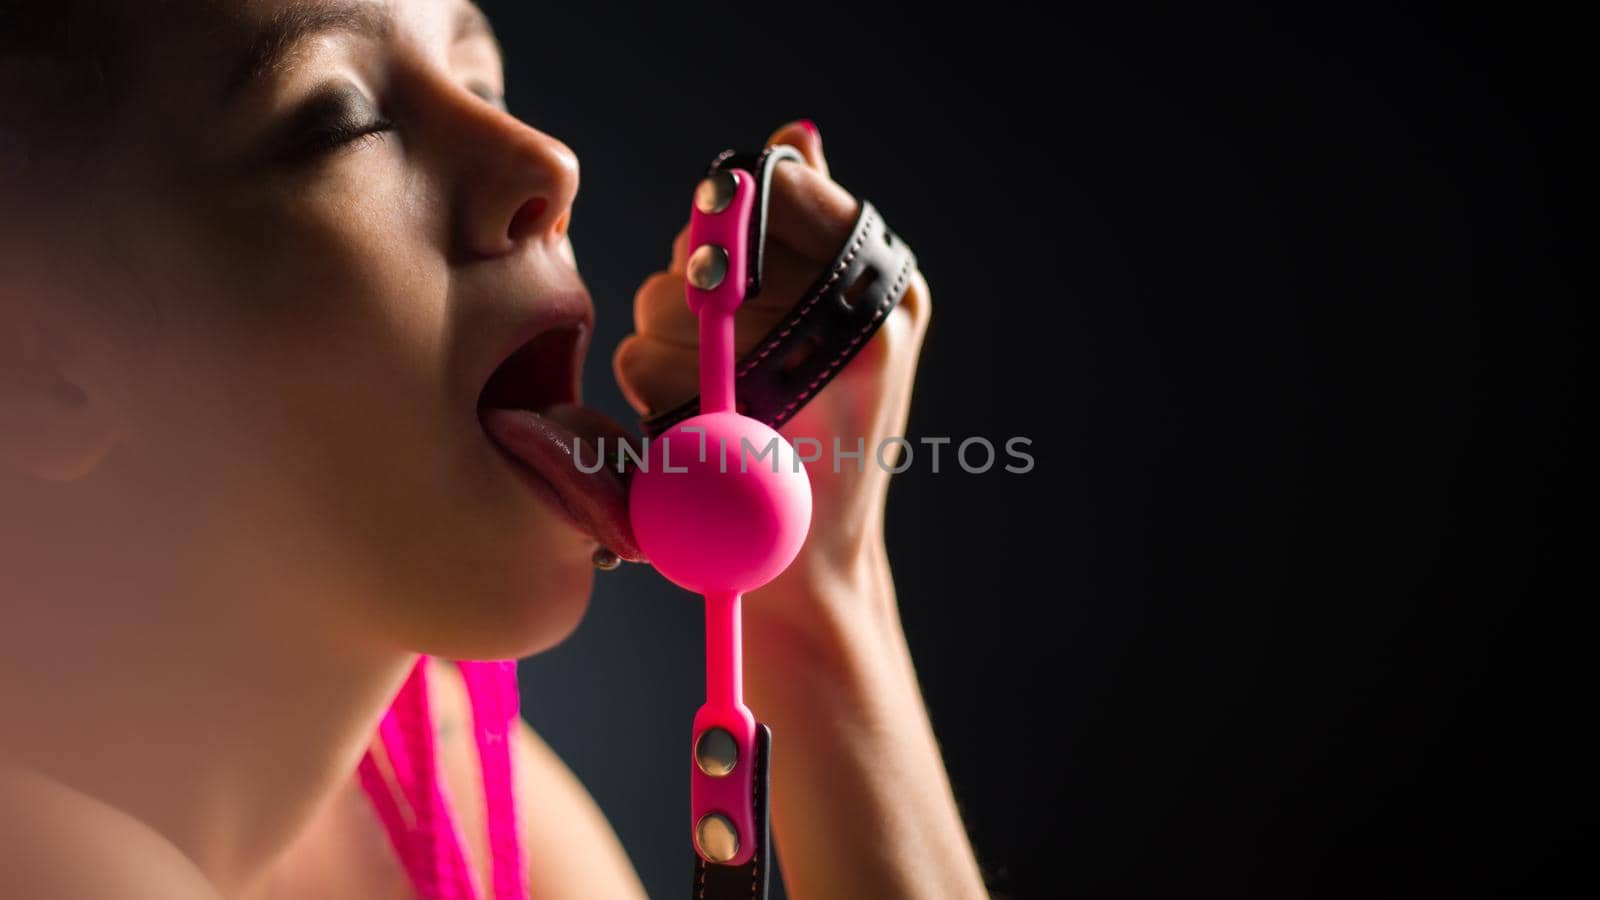 BDSM outfit for adult sex games. A young woman licks pink gag ball - image